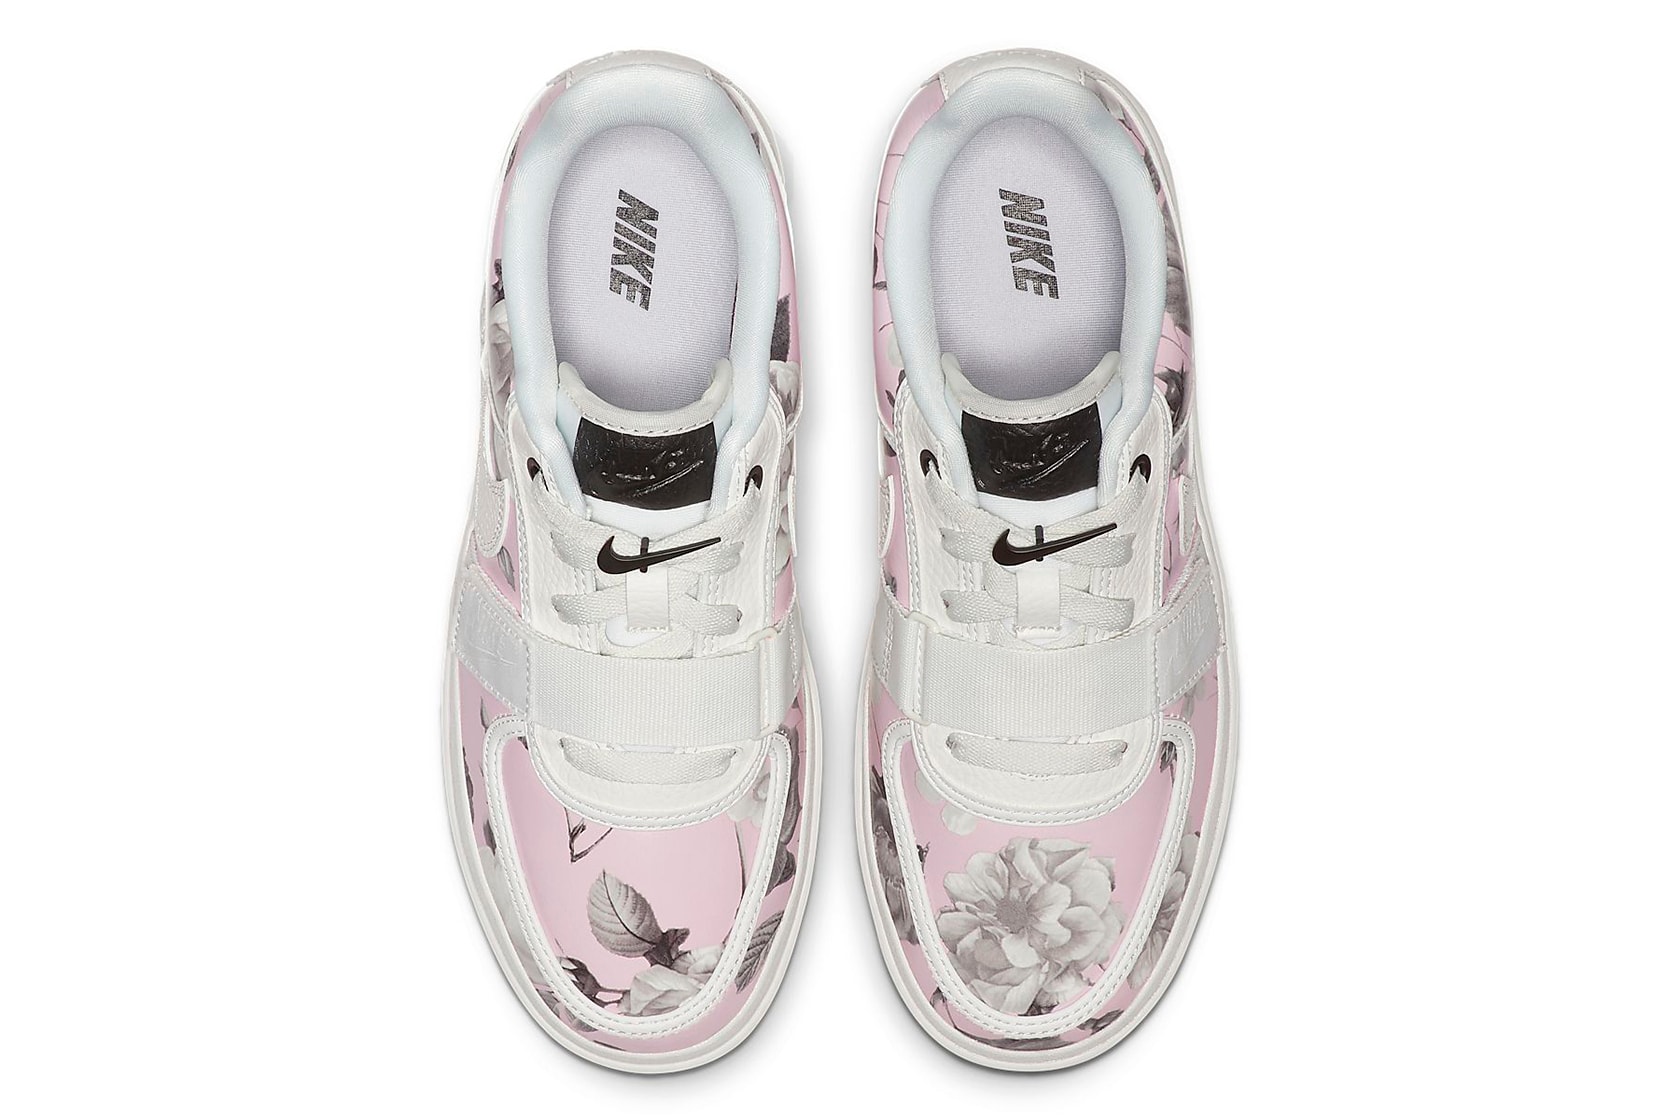 Nike Vandal 2K LX Floral Rose Pink White Leather Platform Sneakers Trainers